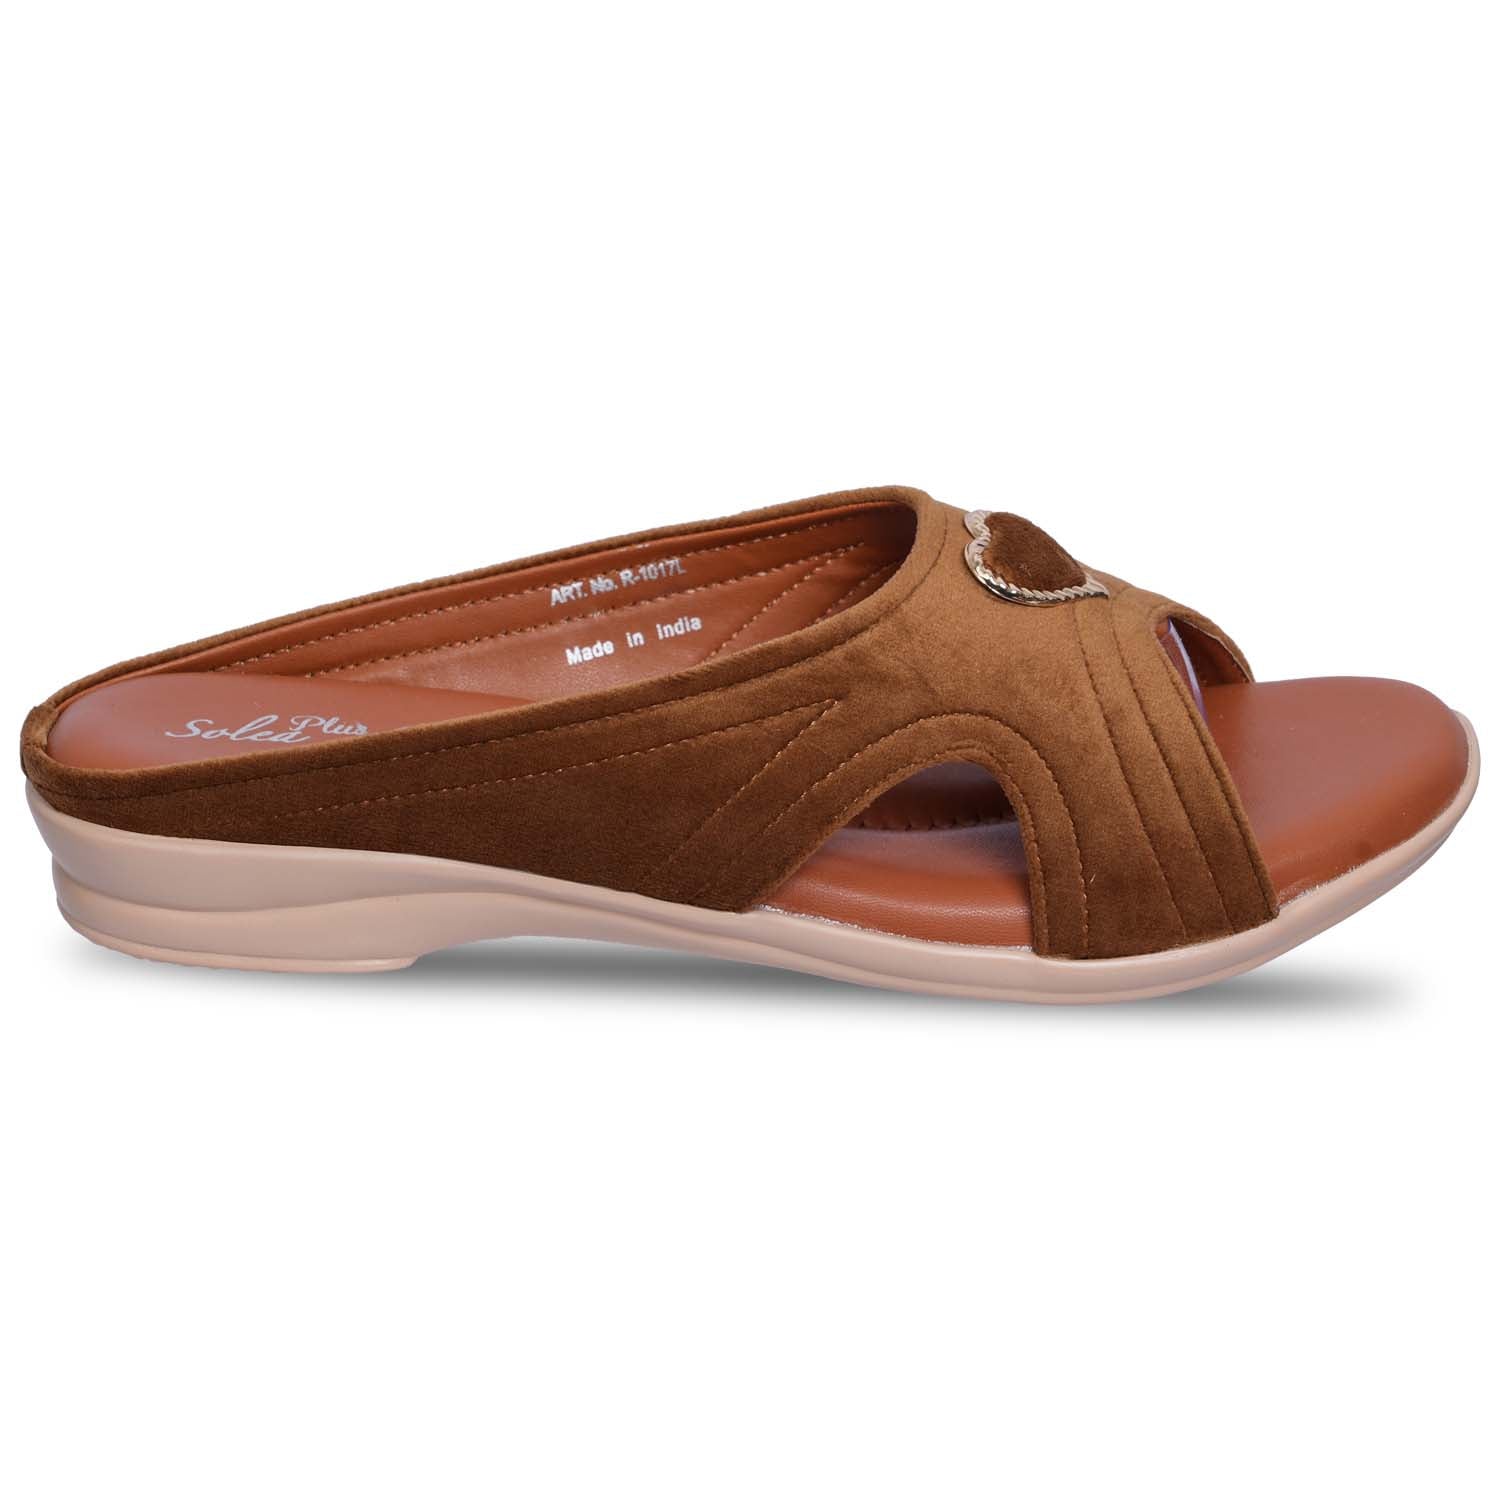 Paragon R1017L Women Sandals | Casual &amp; Formal Sandals | Stylish, Comfortable &amp; Durable | For Daily &amp; Occasion Wear